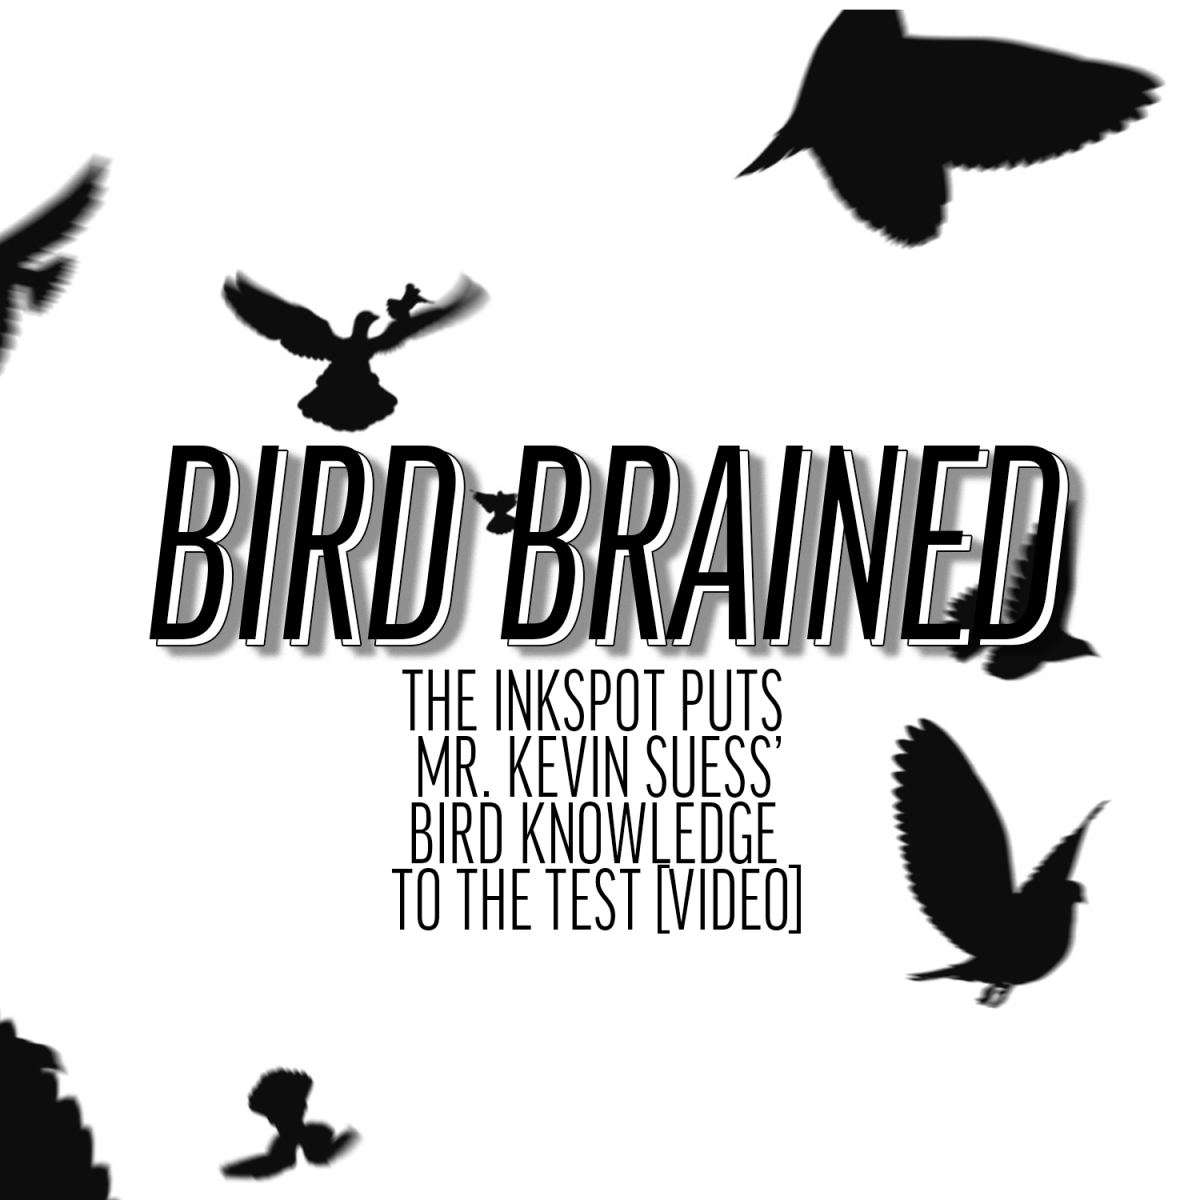 Bird brained: The Inkspot puts Mr. Kevin Suess’ bird knowledge to the test [video]